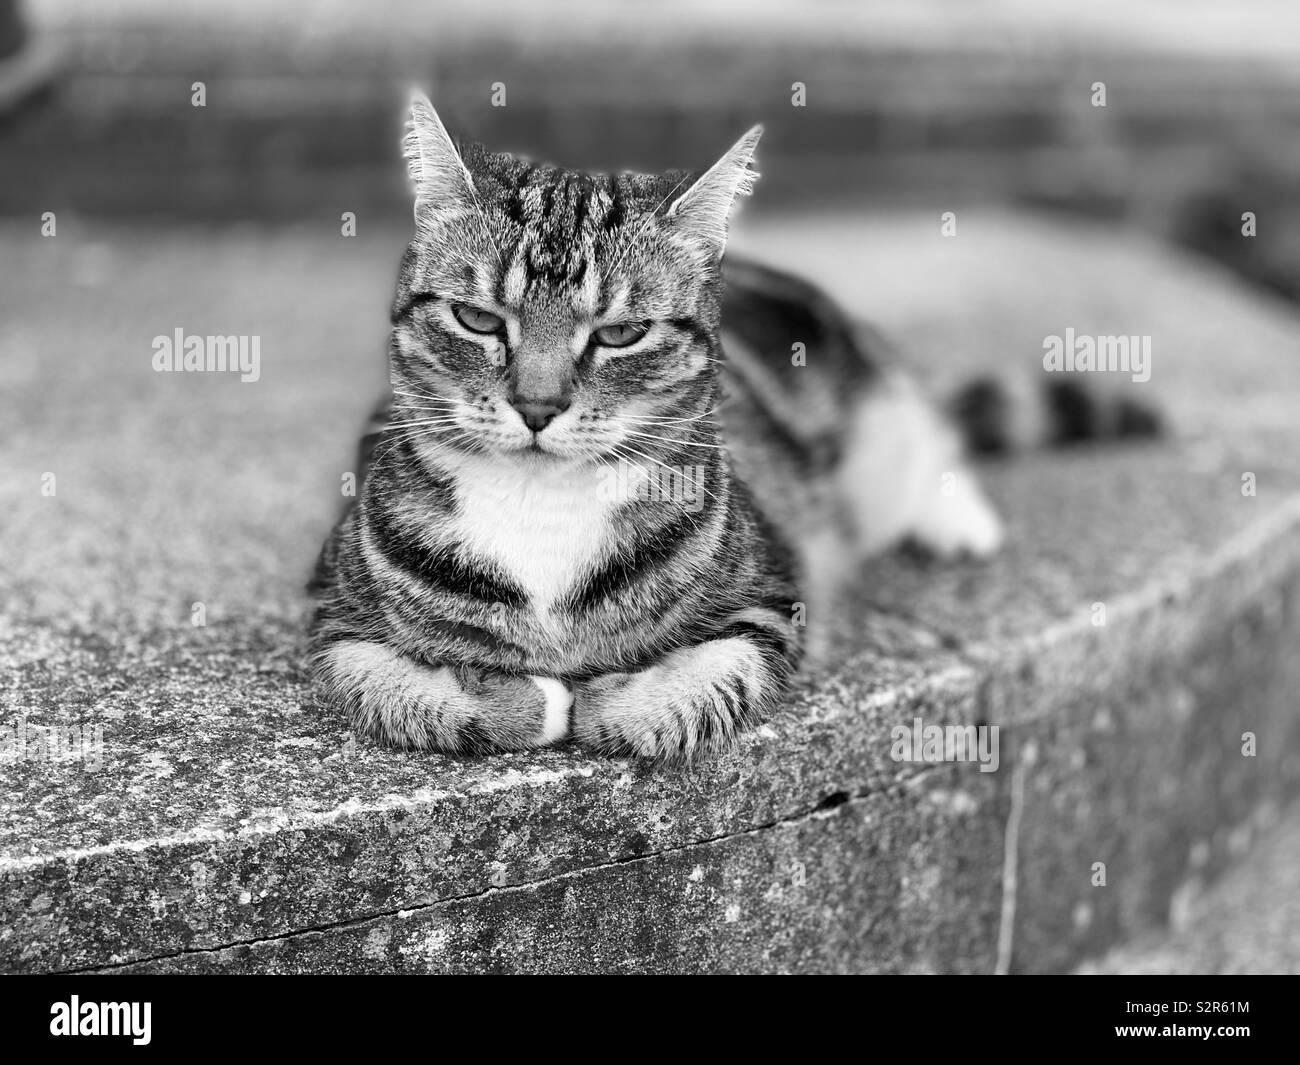 Angry Black and White Stock Photos & Images - Alamy